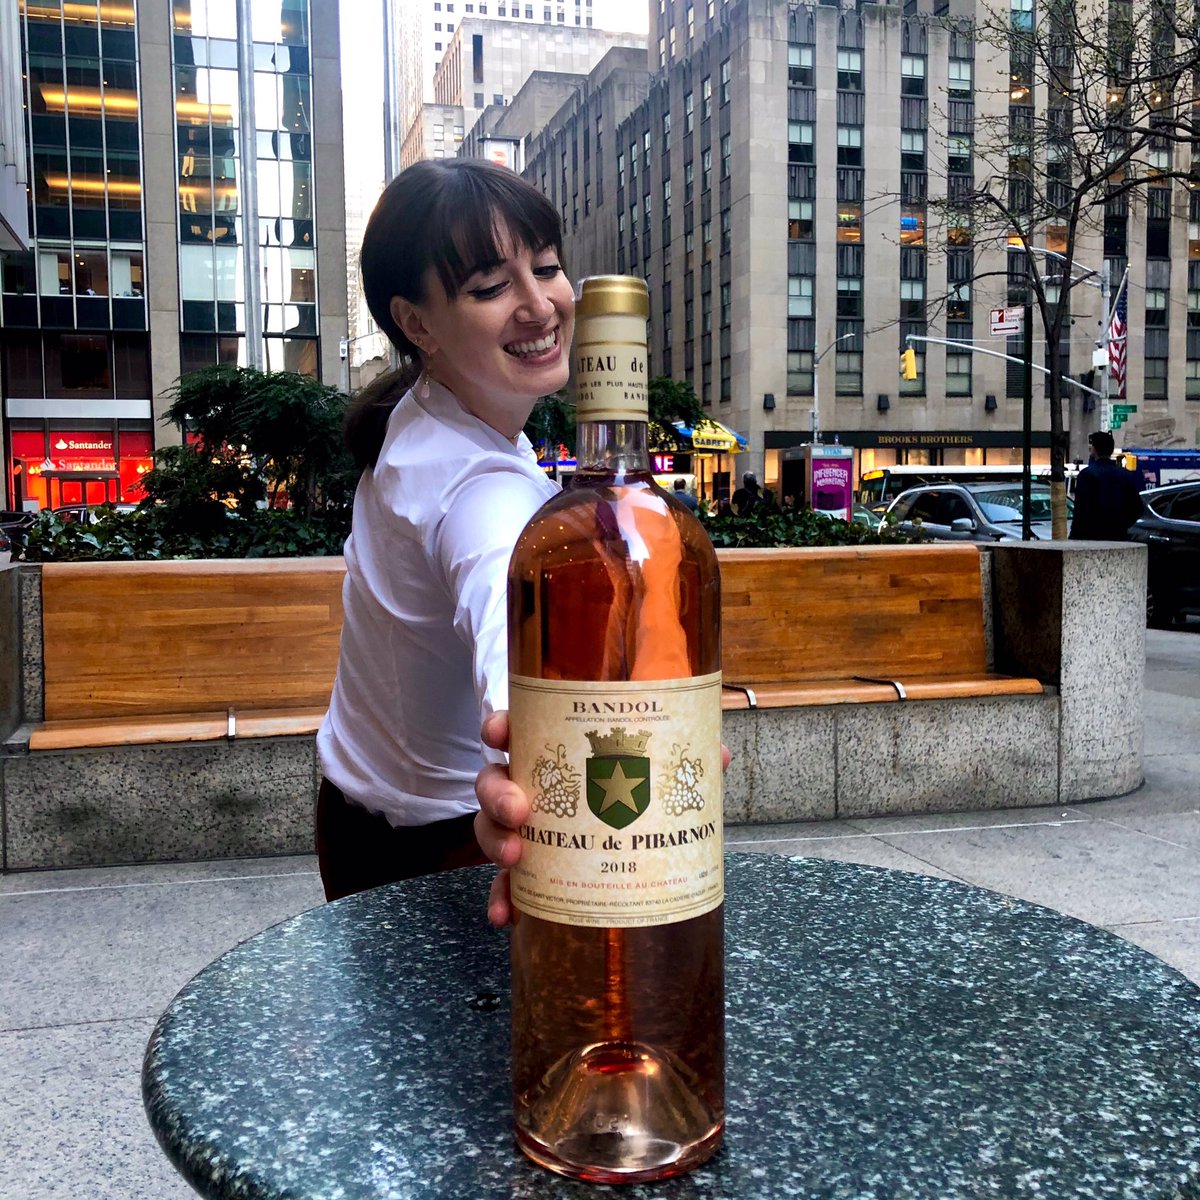 This #daylightsavings calls for a #great #rose and a #bigsmile 
.
.
.
.
.
.
#chateaudepibarnon #bandol #mourvedre #roseallday #drinkpink #provence #winesimple #MondayMotivation